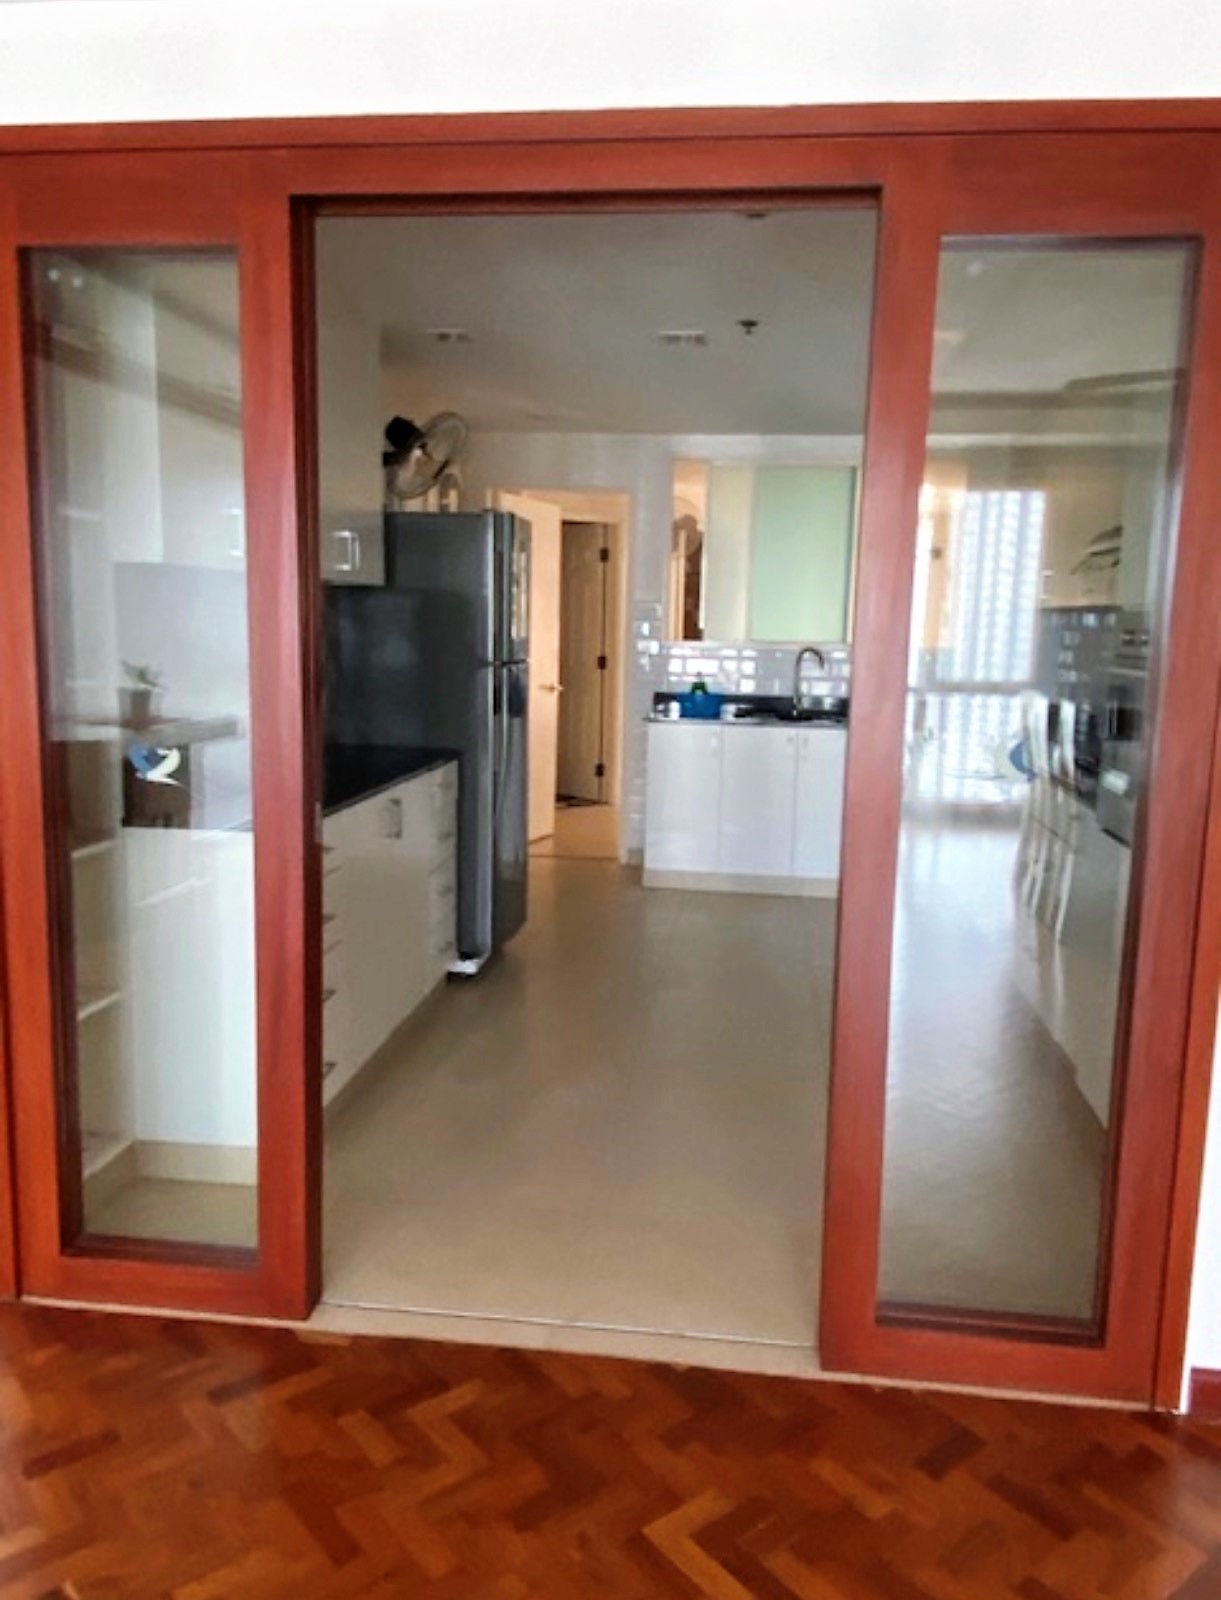 3 Bedrooms Condo Unit For Sale – 29th Floor at The Regency at Salcedo